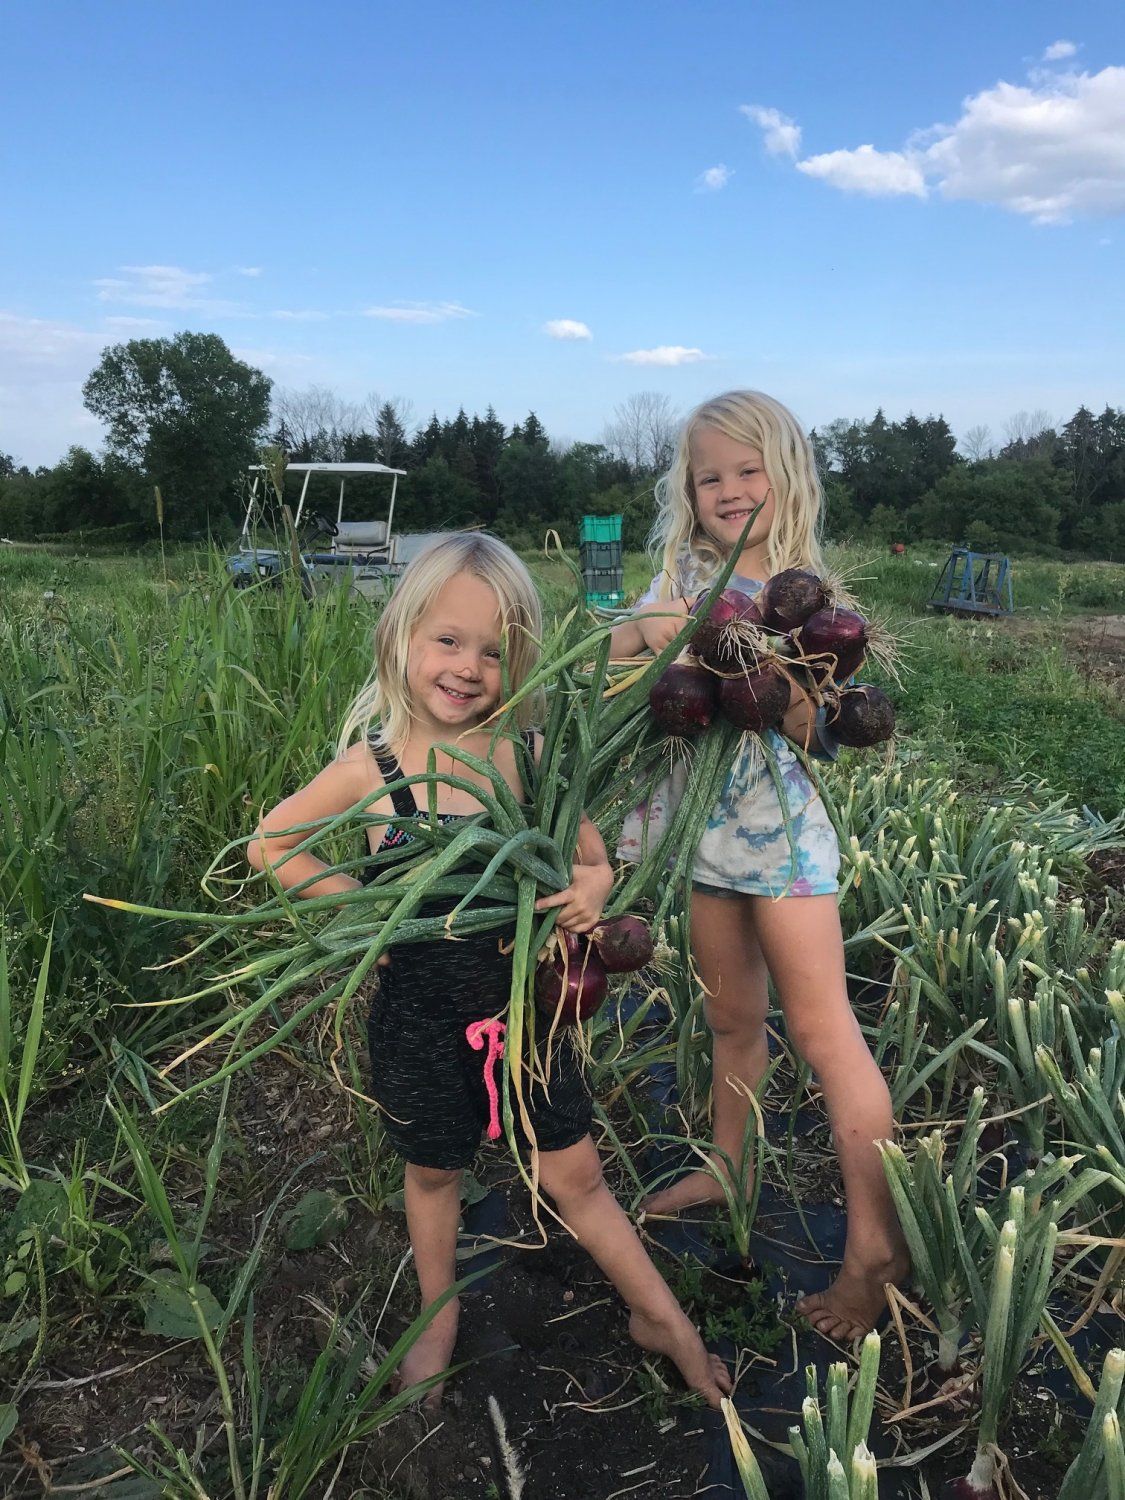 Next Happening: Farm Happenings for August 11, 2021